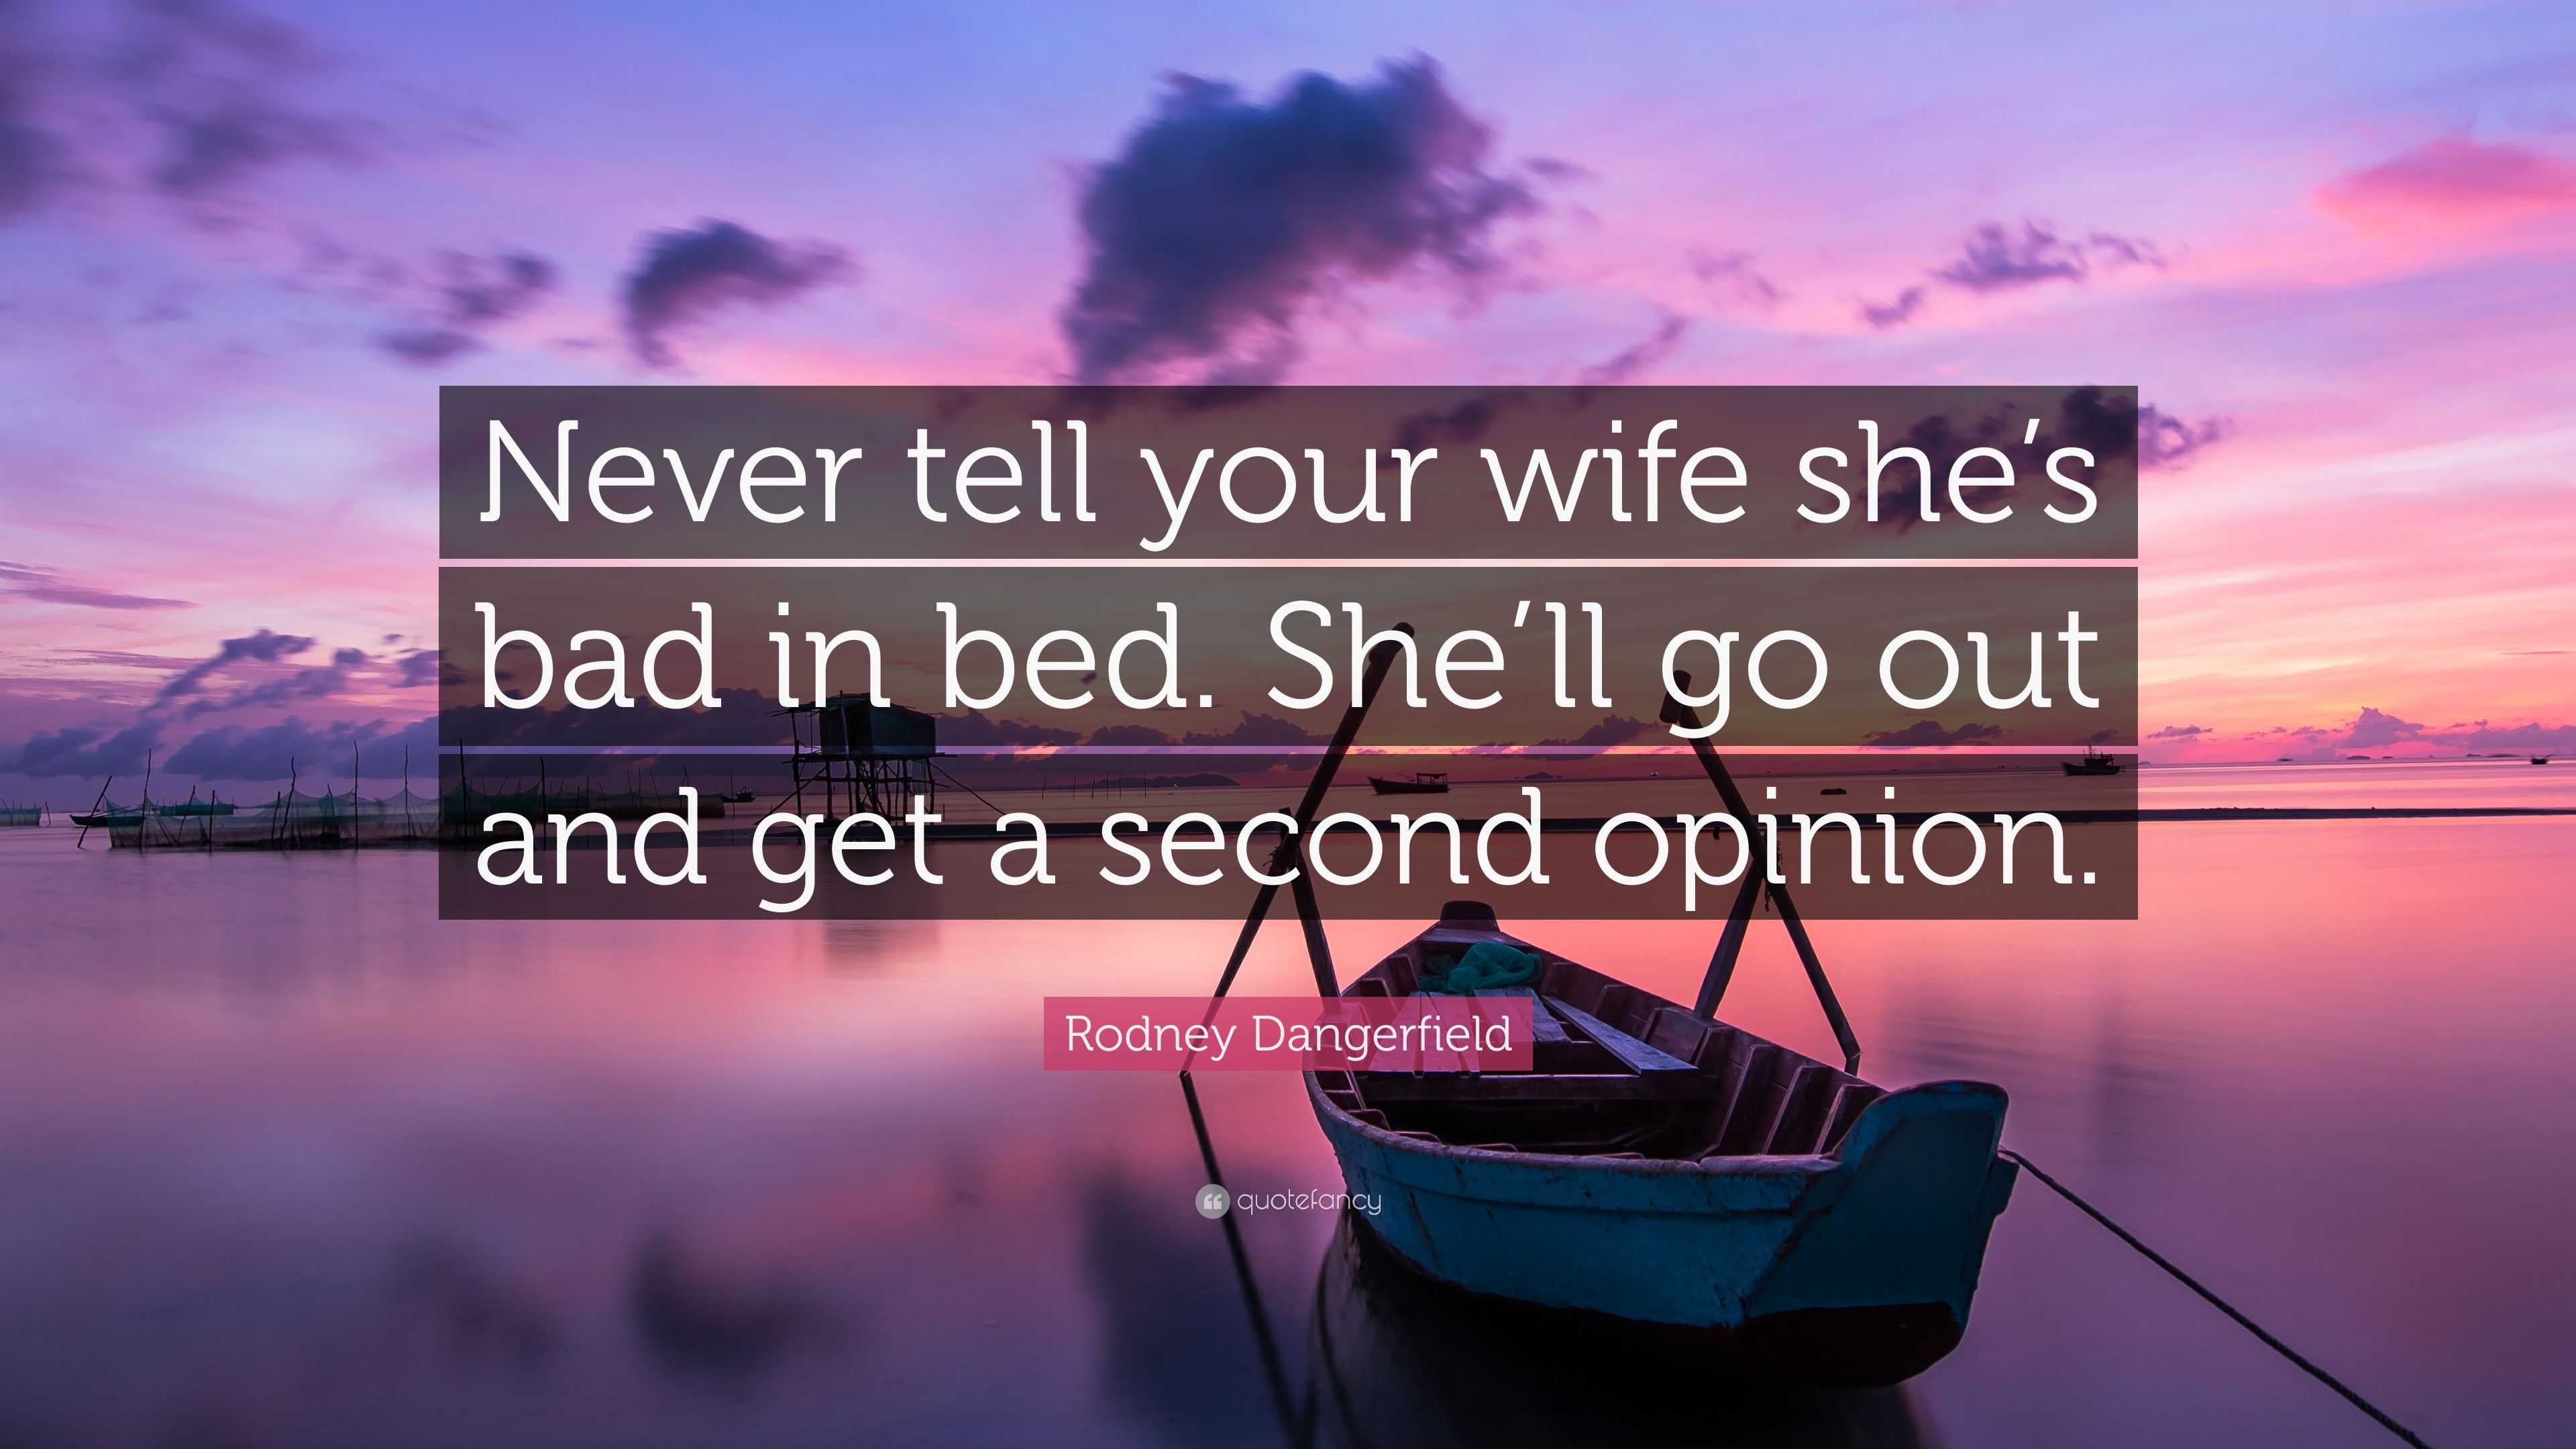 Rodney Dangerfield Quote: "Never tell your wife she's bad in bed. She'll go out and get a second ...